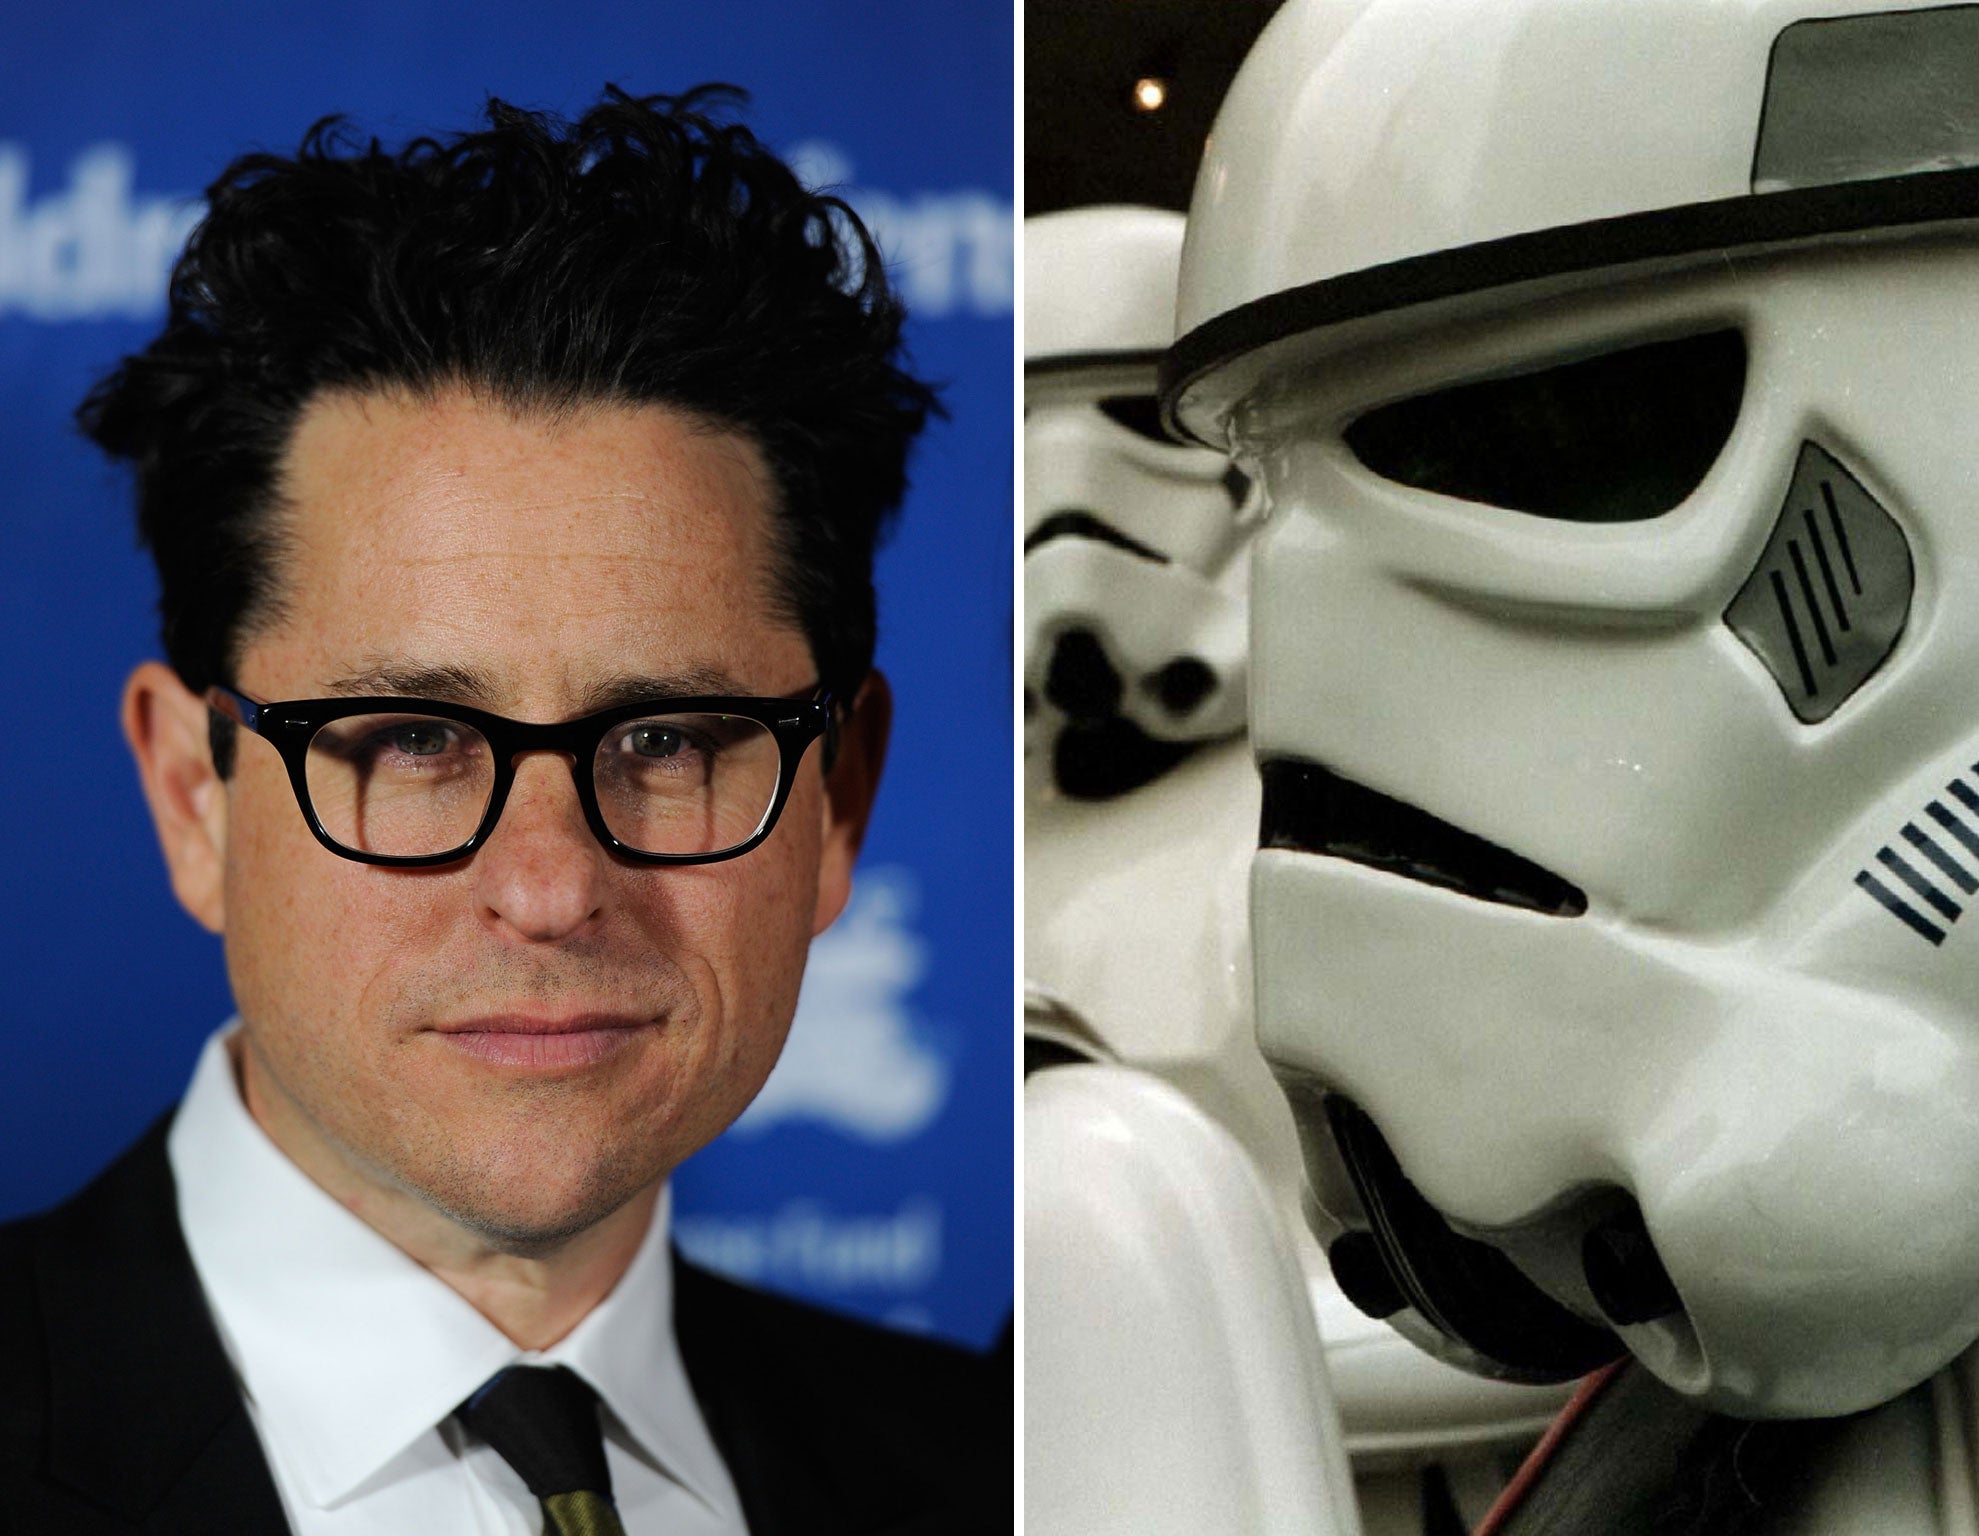 JJ Abrams is rumoured to be directing the next Star Wars movie